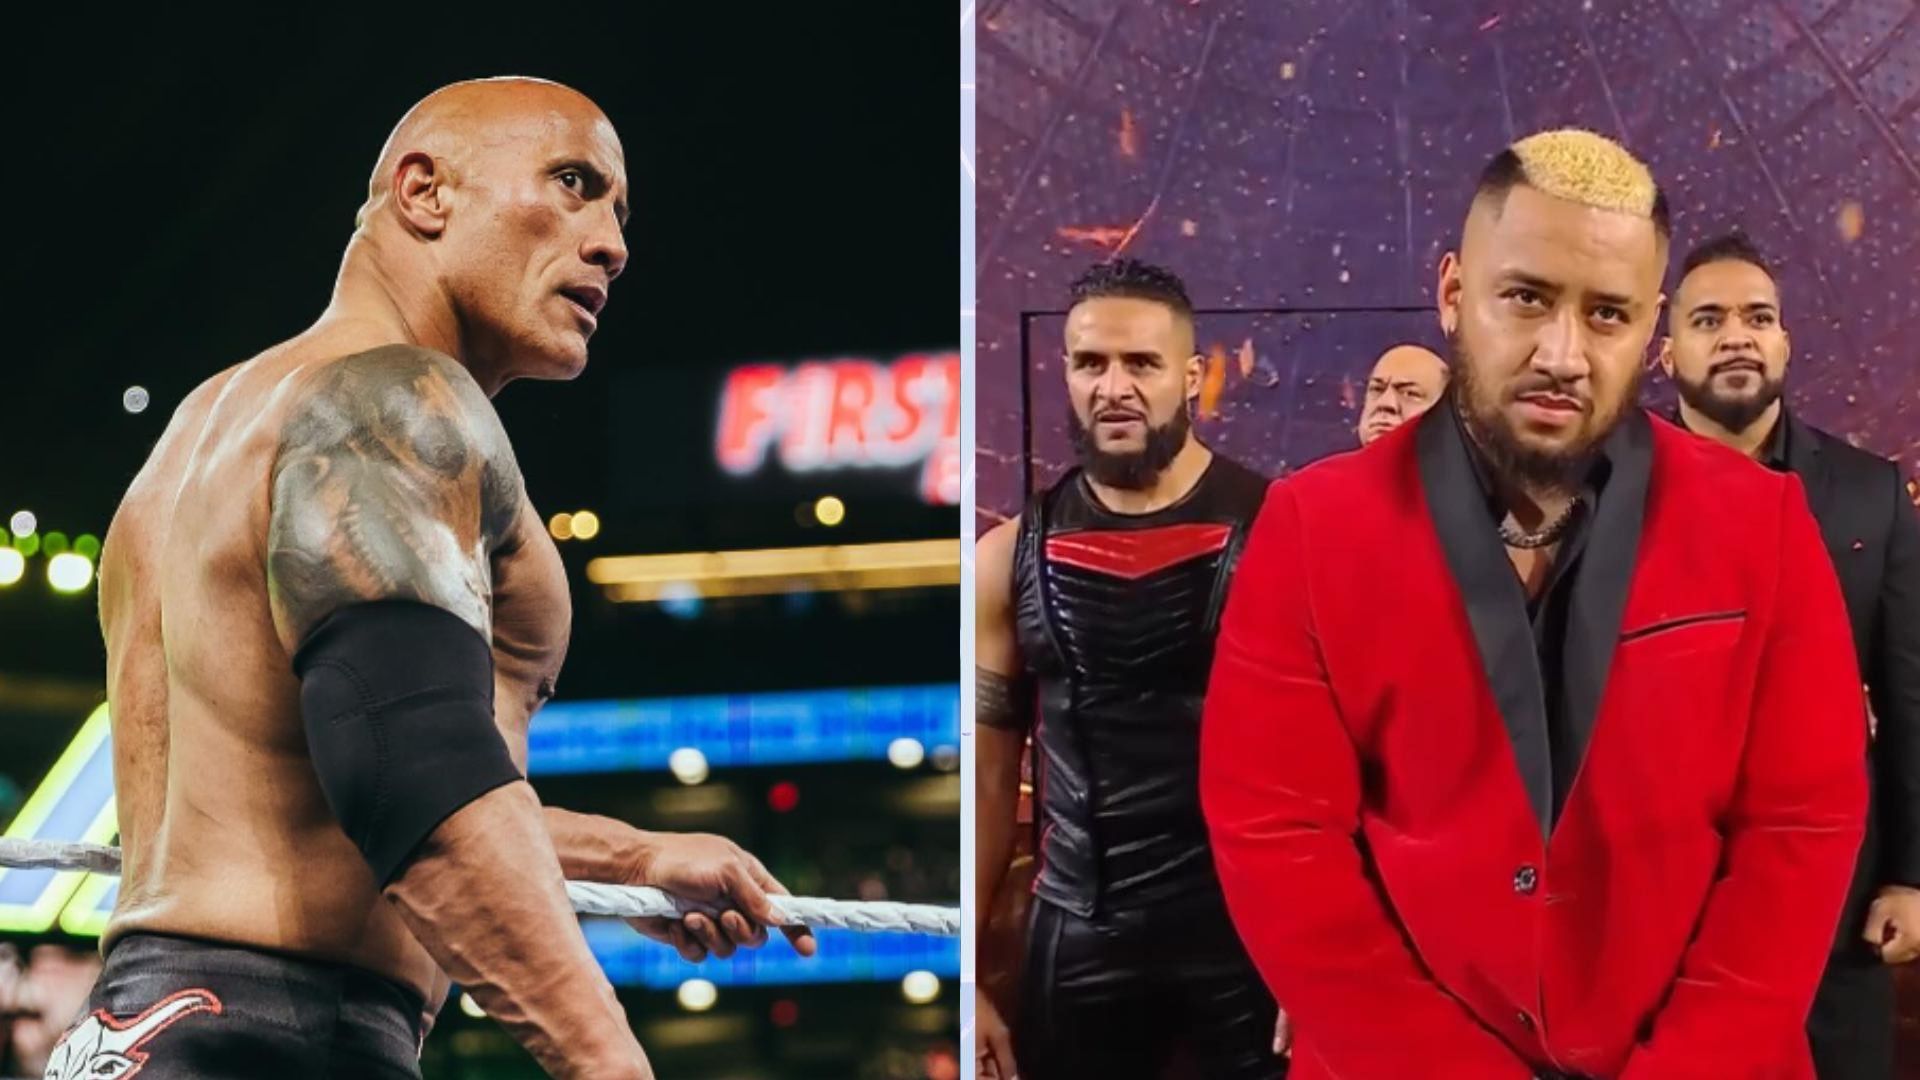 The Rock is a 17-time WWE champion [Image credits: star